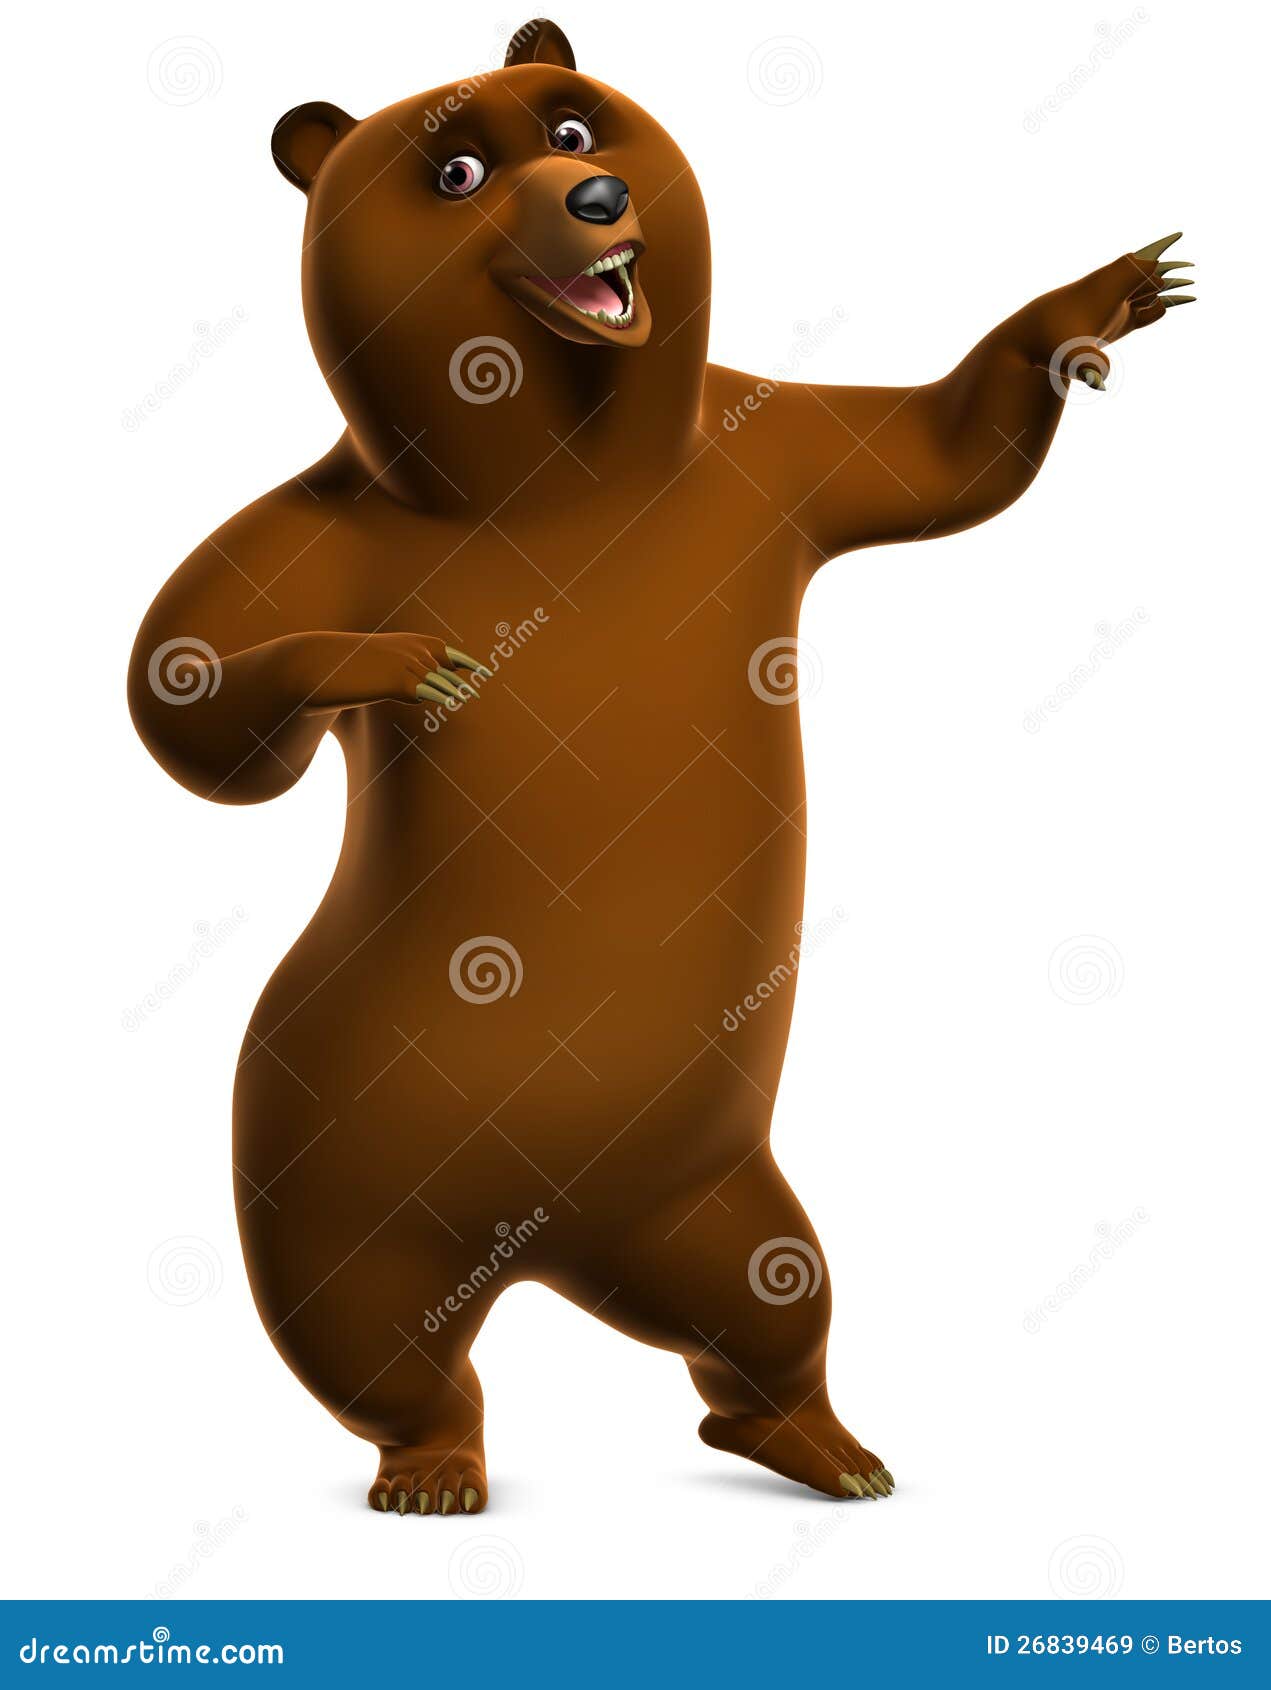 Dancing Grizzly Bear Royalty Free Stock Images - Image: 26839469